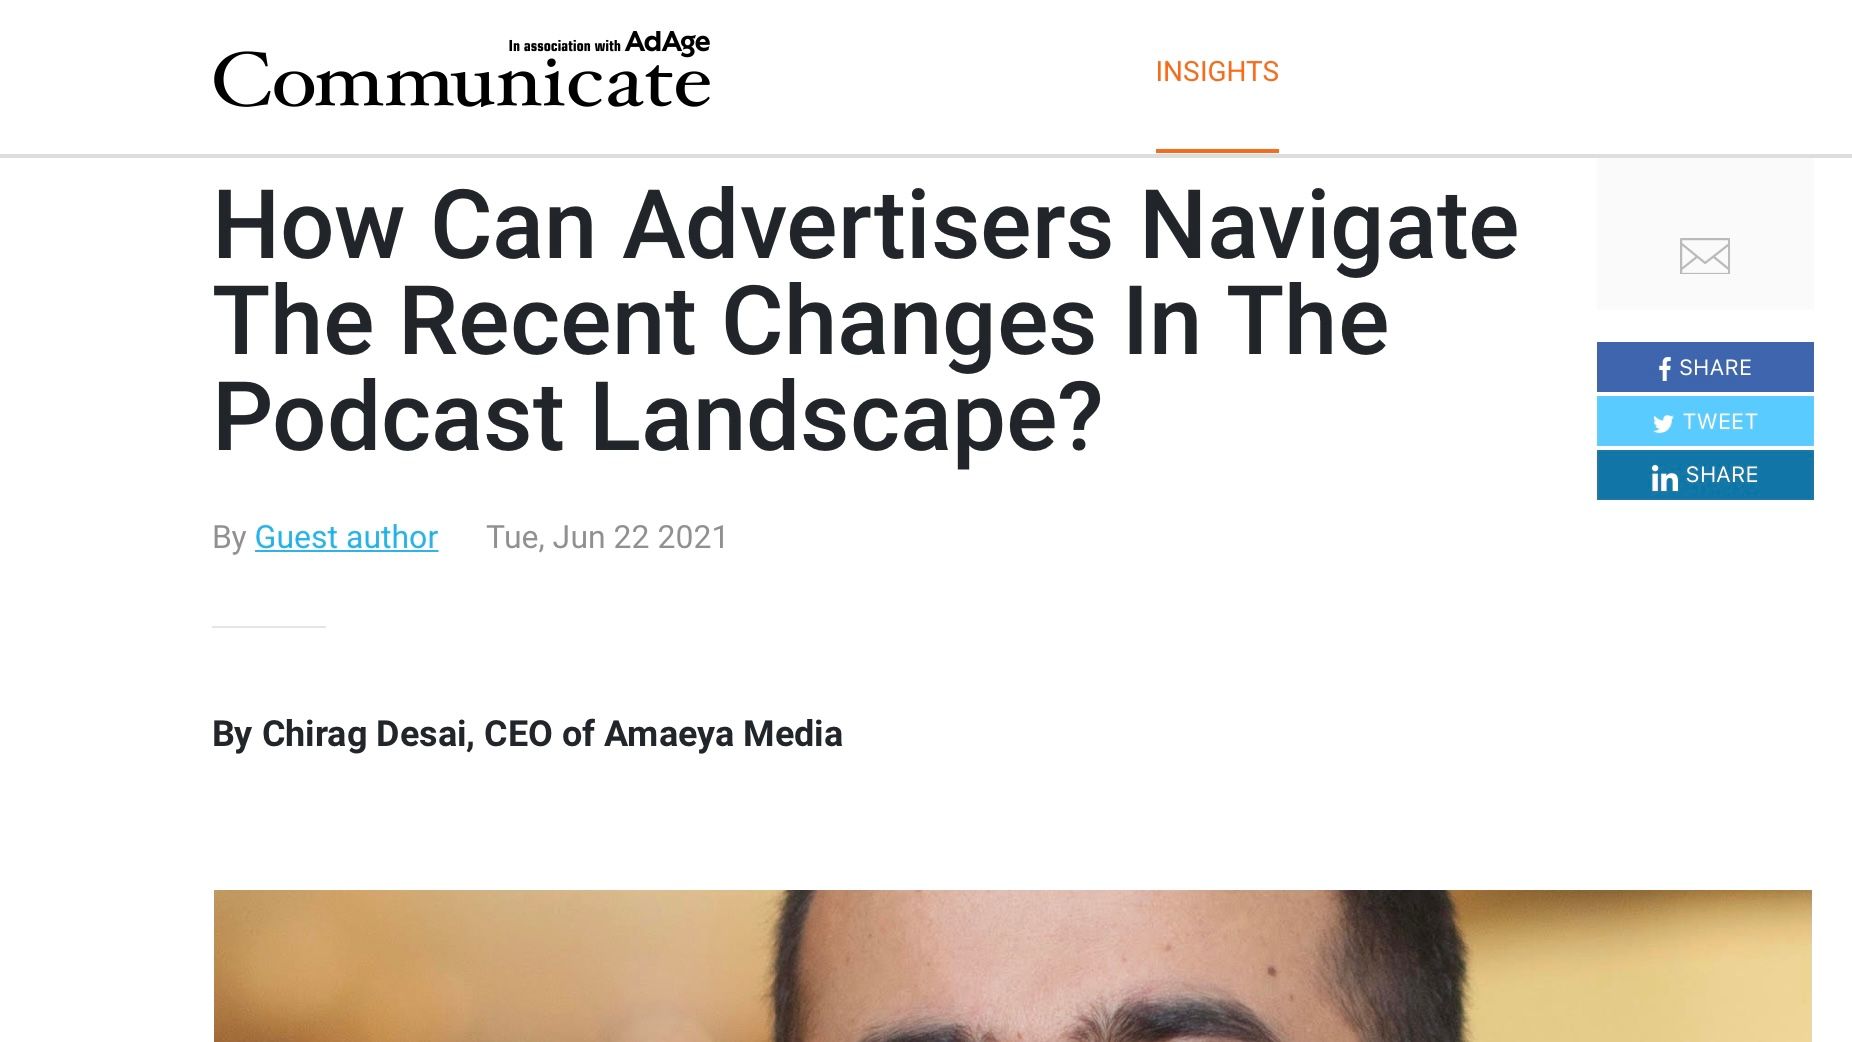 How can advertisers navigate recent changes in the podcast landscape?